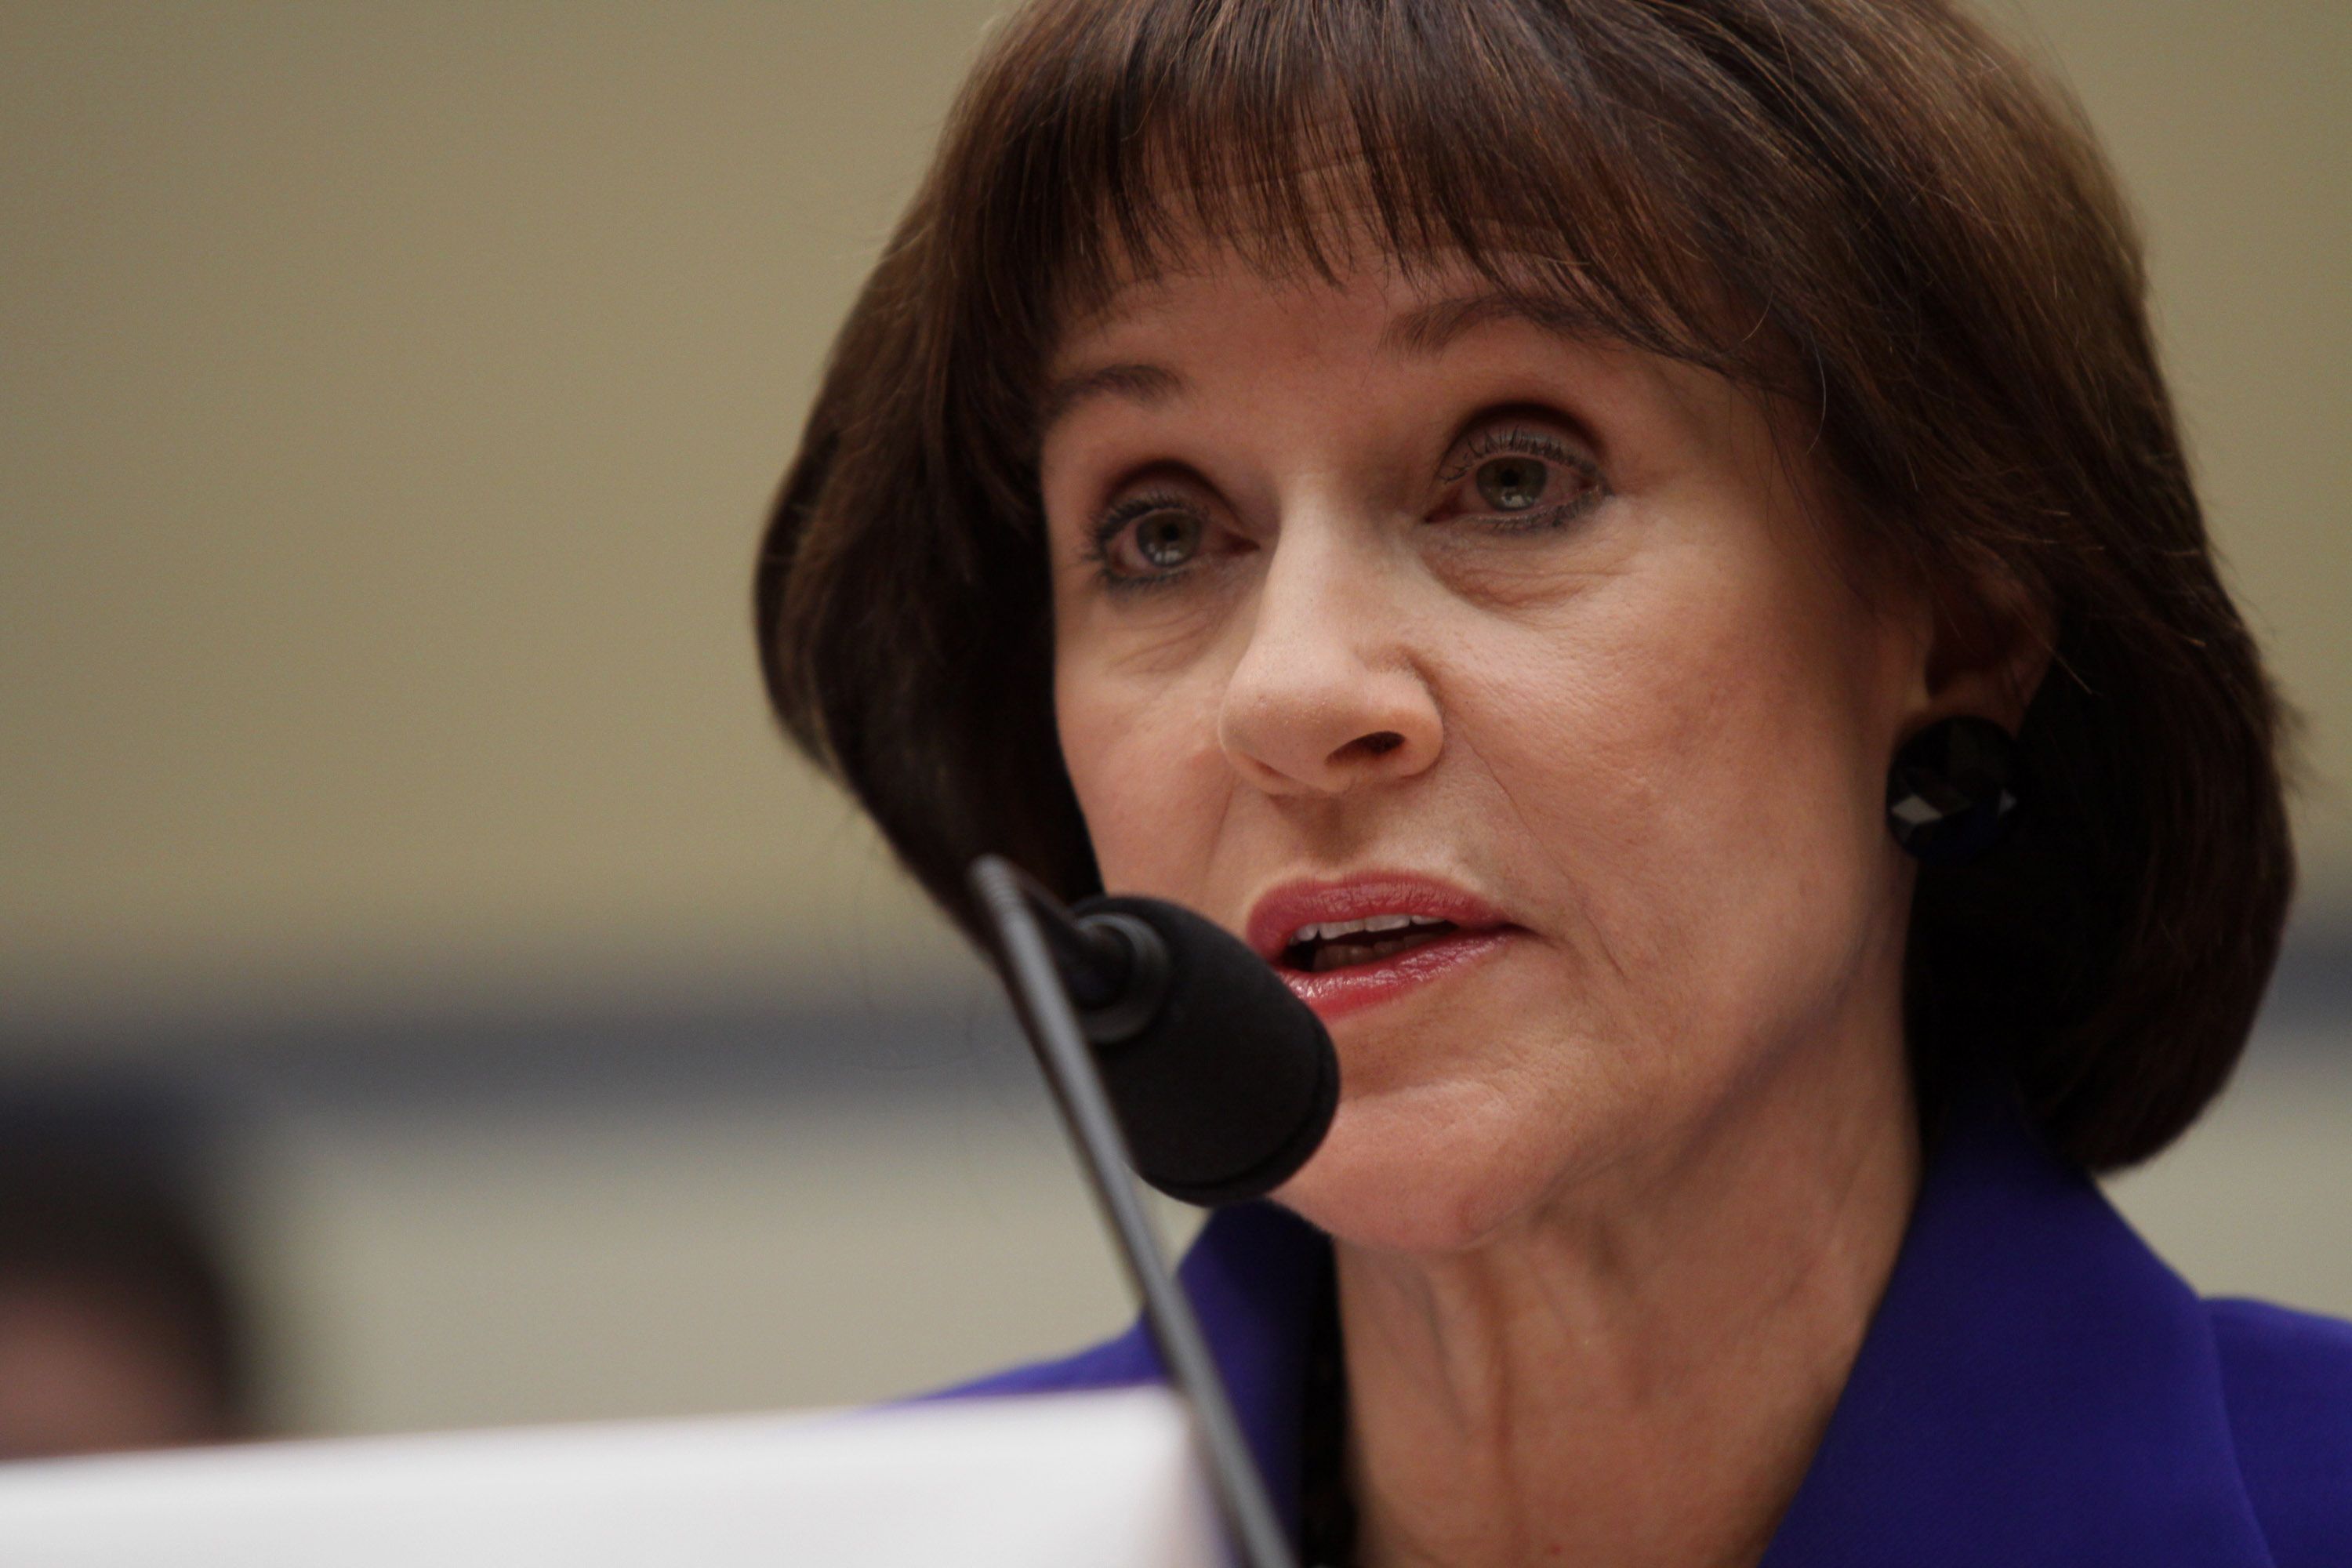 Former Internal Revenue Service official Lois Lerner speaks Wednesday on Capitol Hill during the House Oversight and Government Reform Committee hearing on the agency's targeting of Tea Party groups, where she invoked her constitutional right not to incriminate herself.